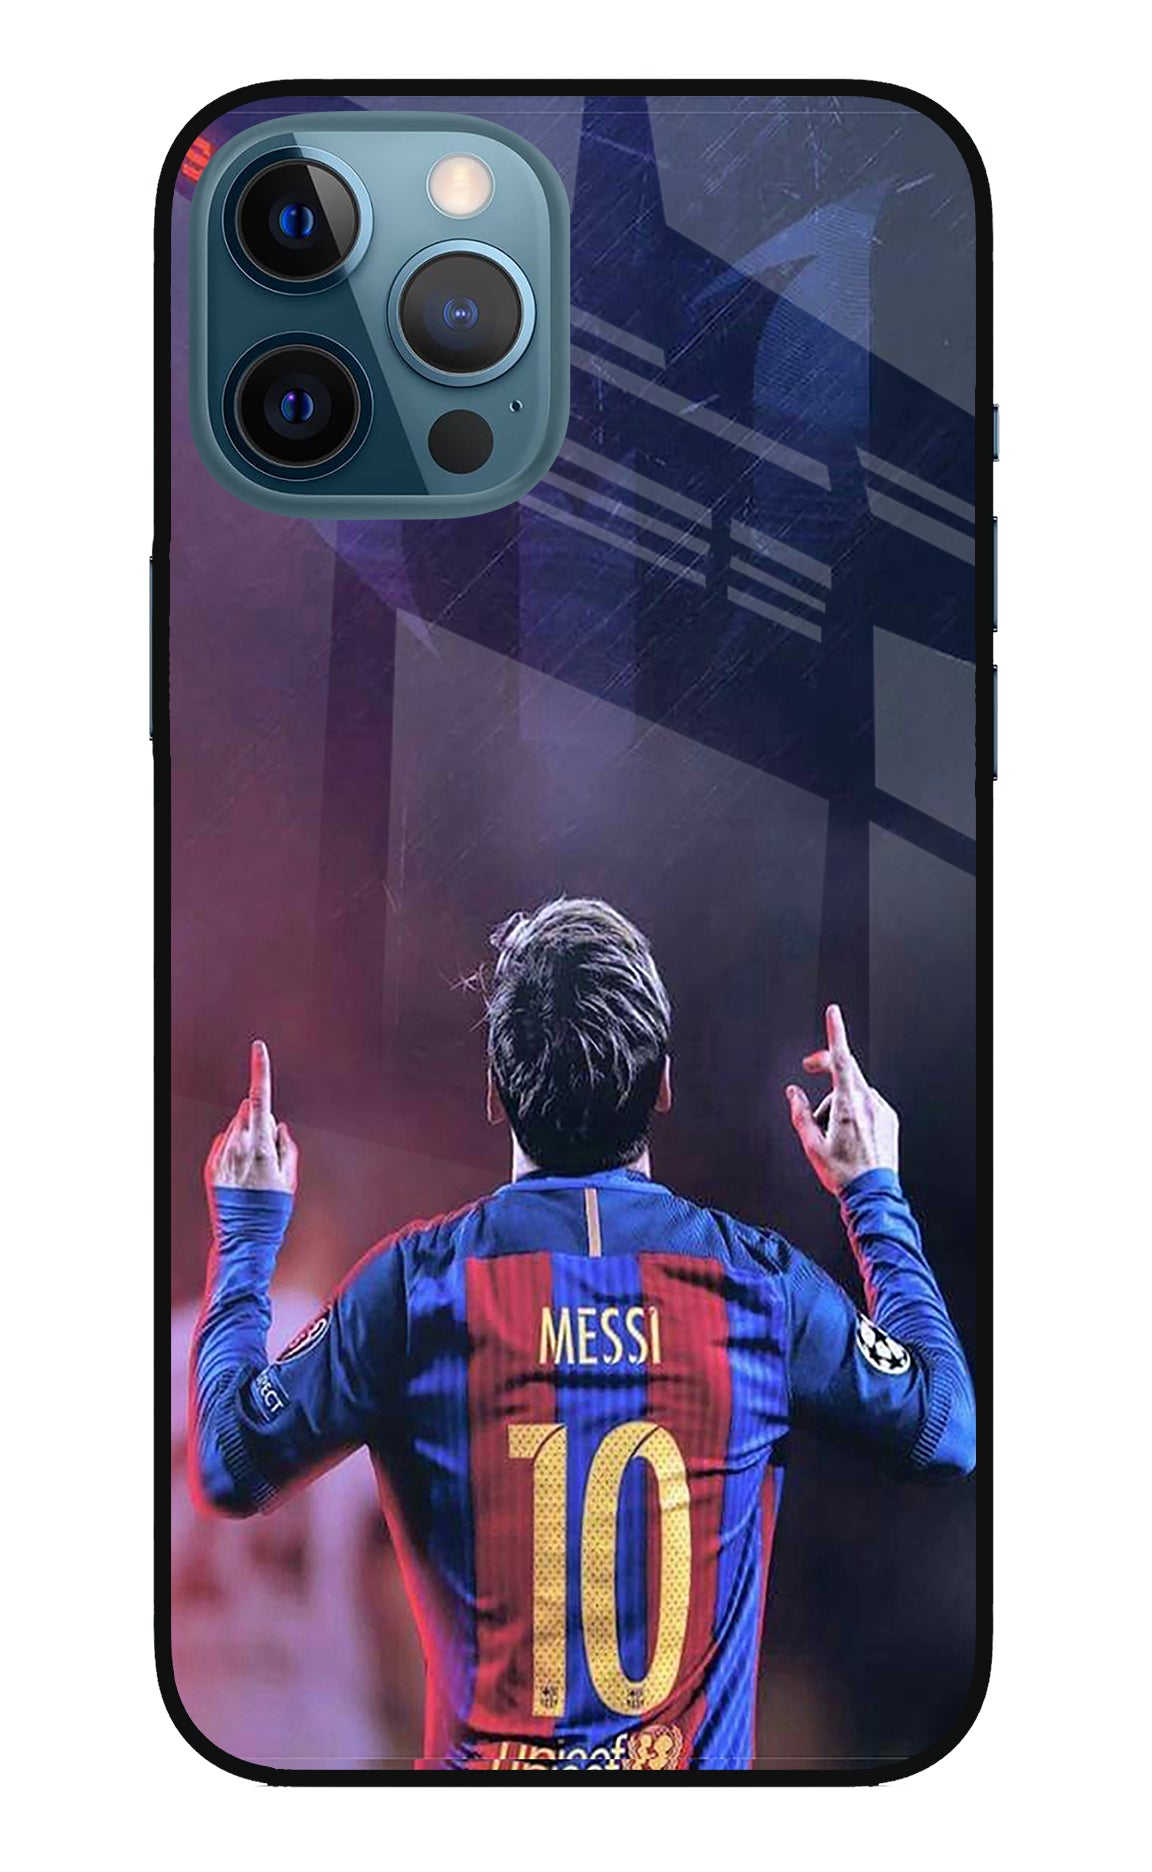 Messi iPhone 12 Pro Max Back Cover